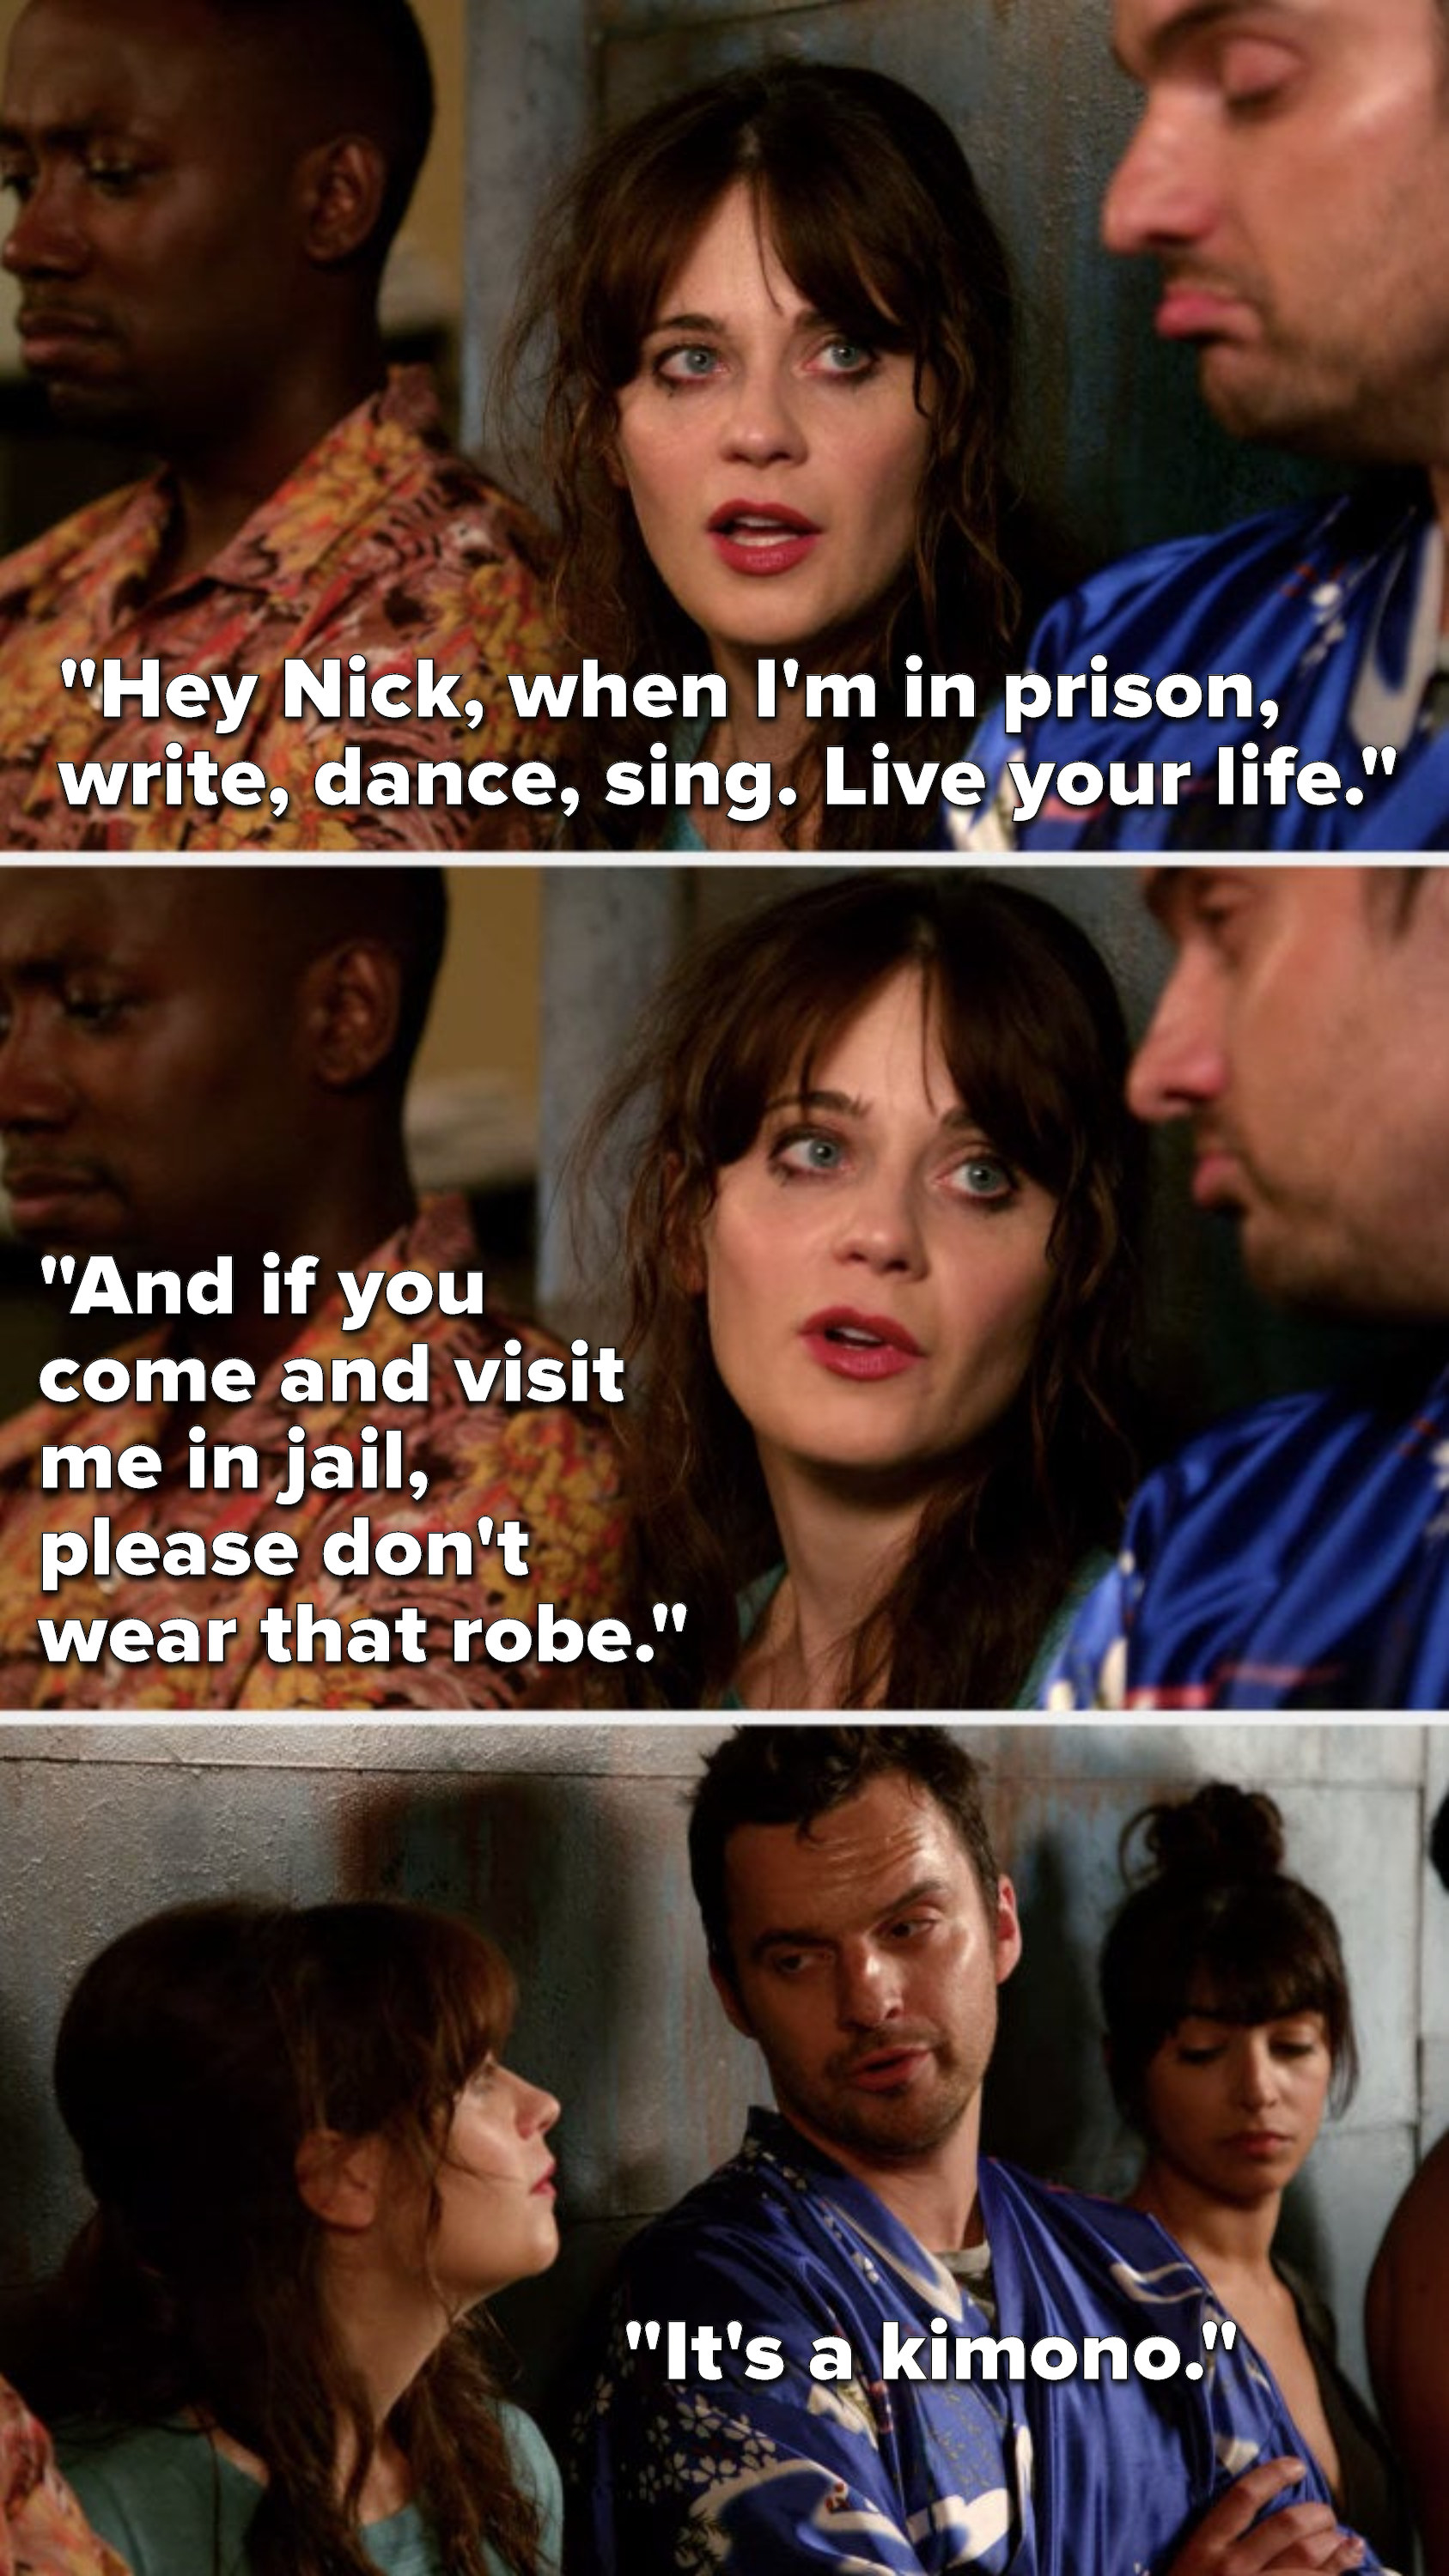 Jess says, &quot;Hey Nick, when I&#x27;m in prison, write, dance, sing, live your life, and if you come and visit me in jail, please don&#x27;t wear that robe,&quot; and Nick says, &quot;It&#x27;s a kimono&quot;